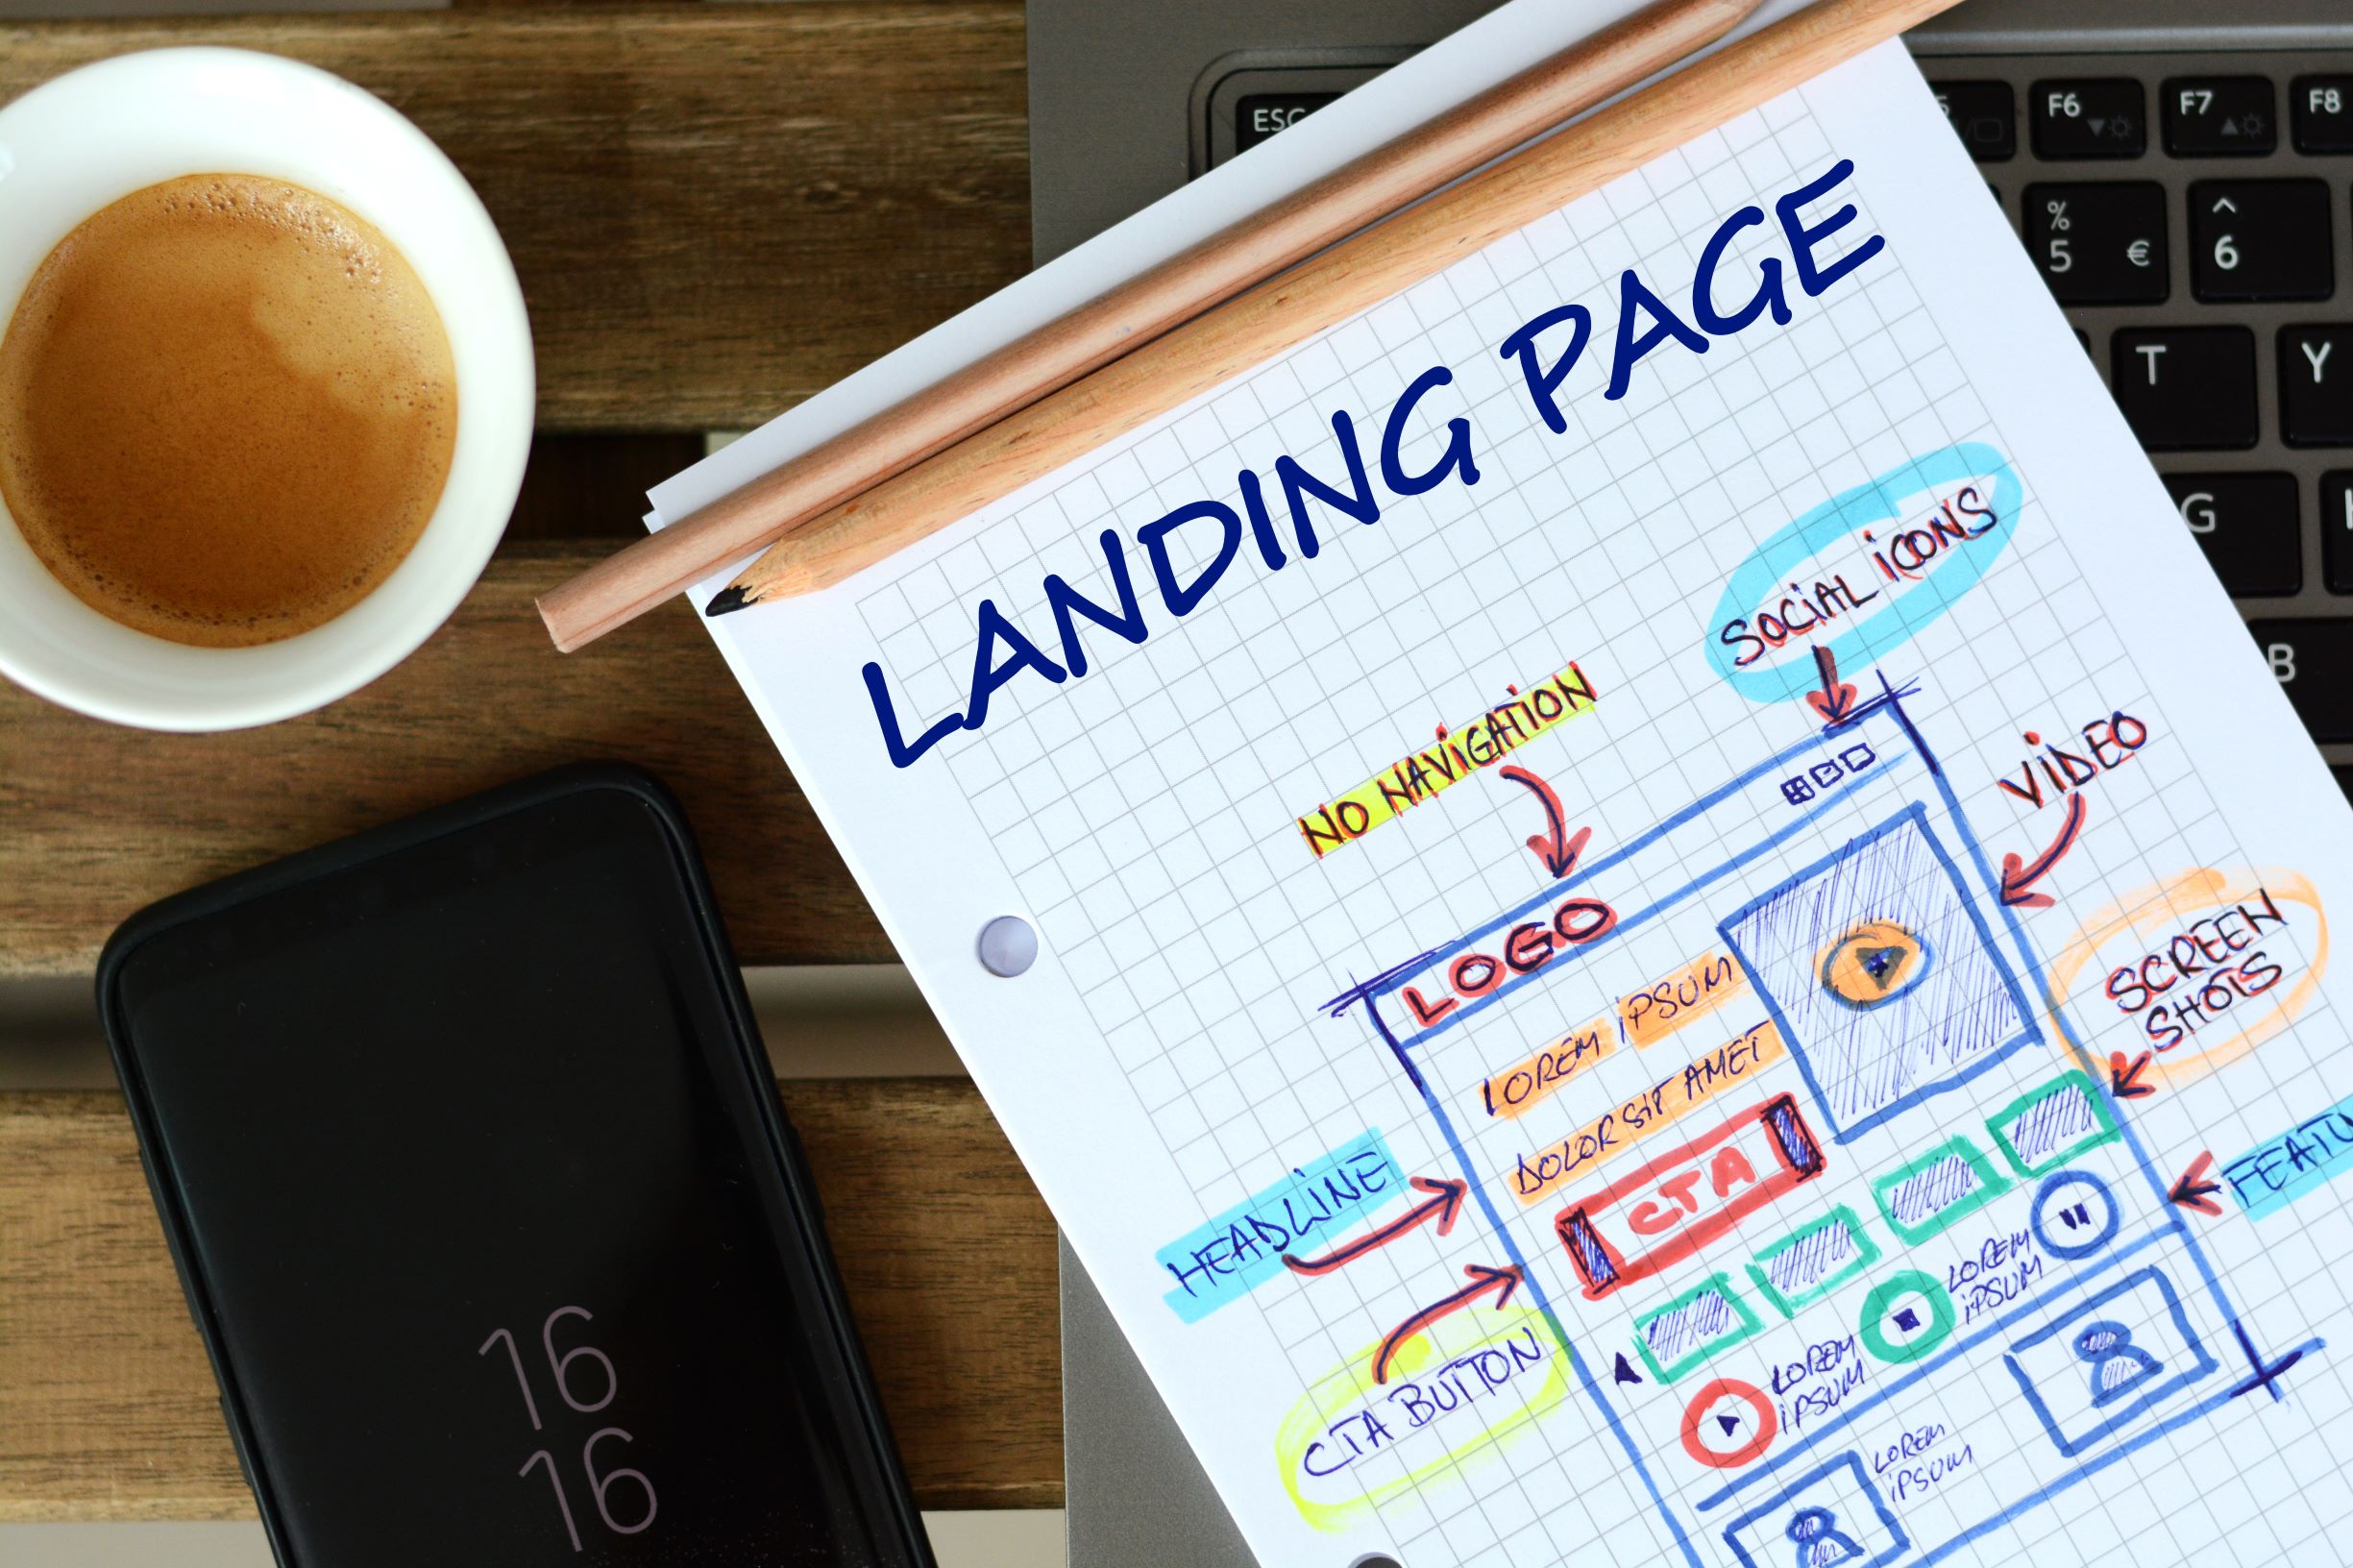 Custom landing pages